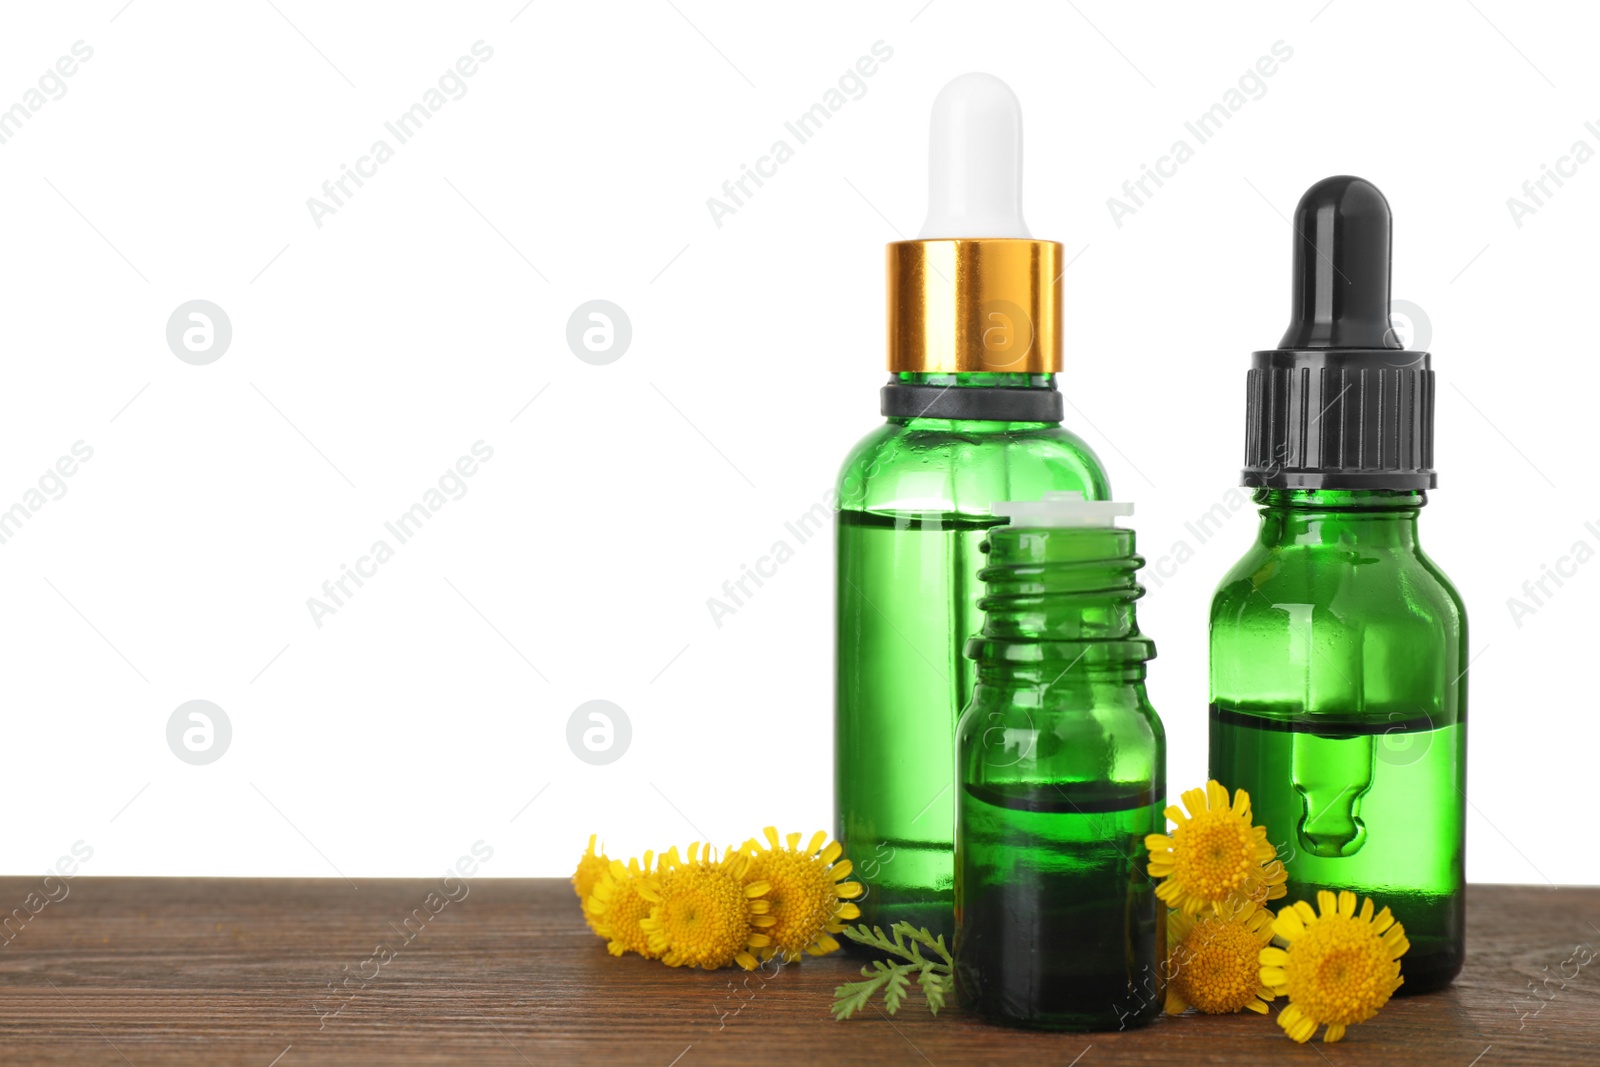 Photo of Bottles of herbal essential oils, pipette and flowers on wooden table, white background